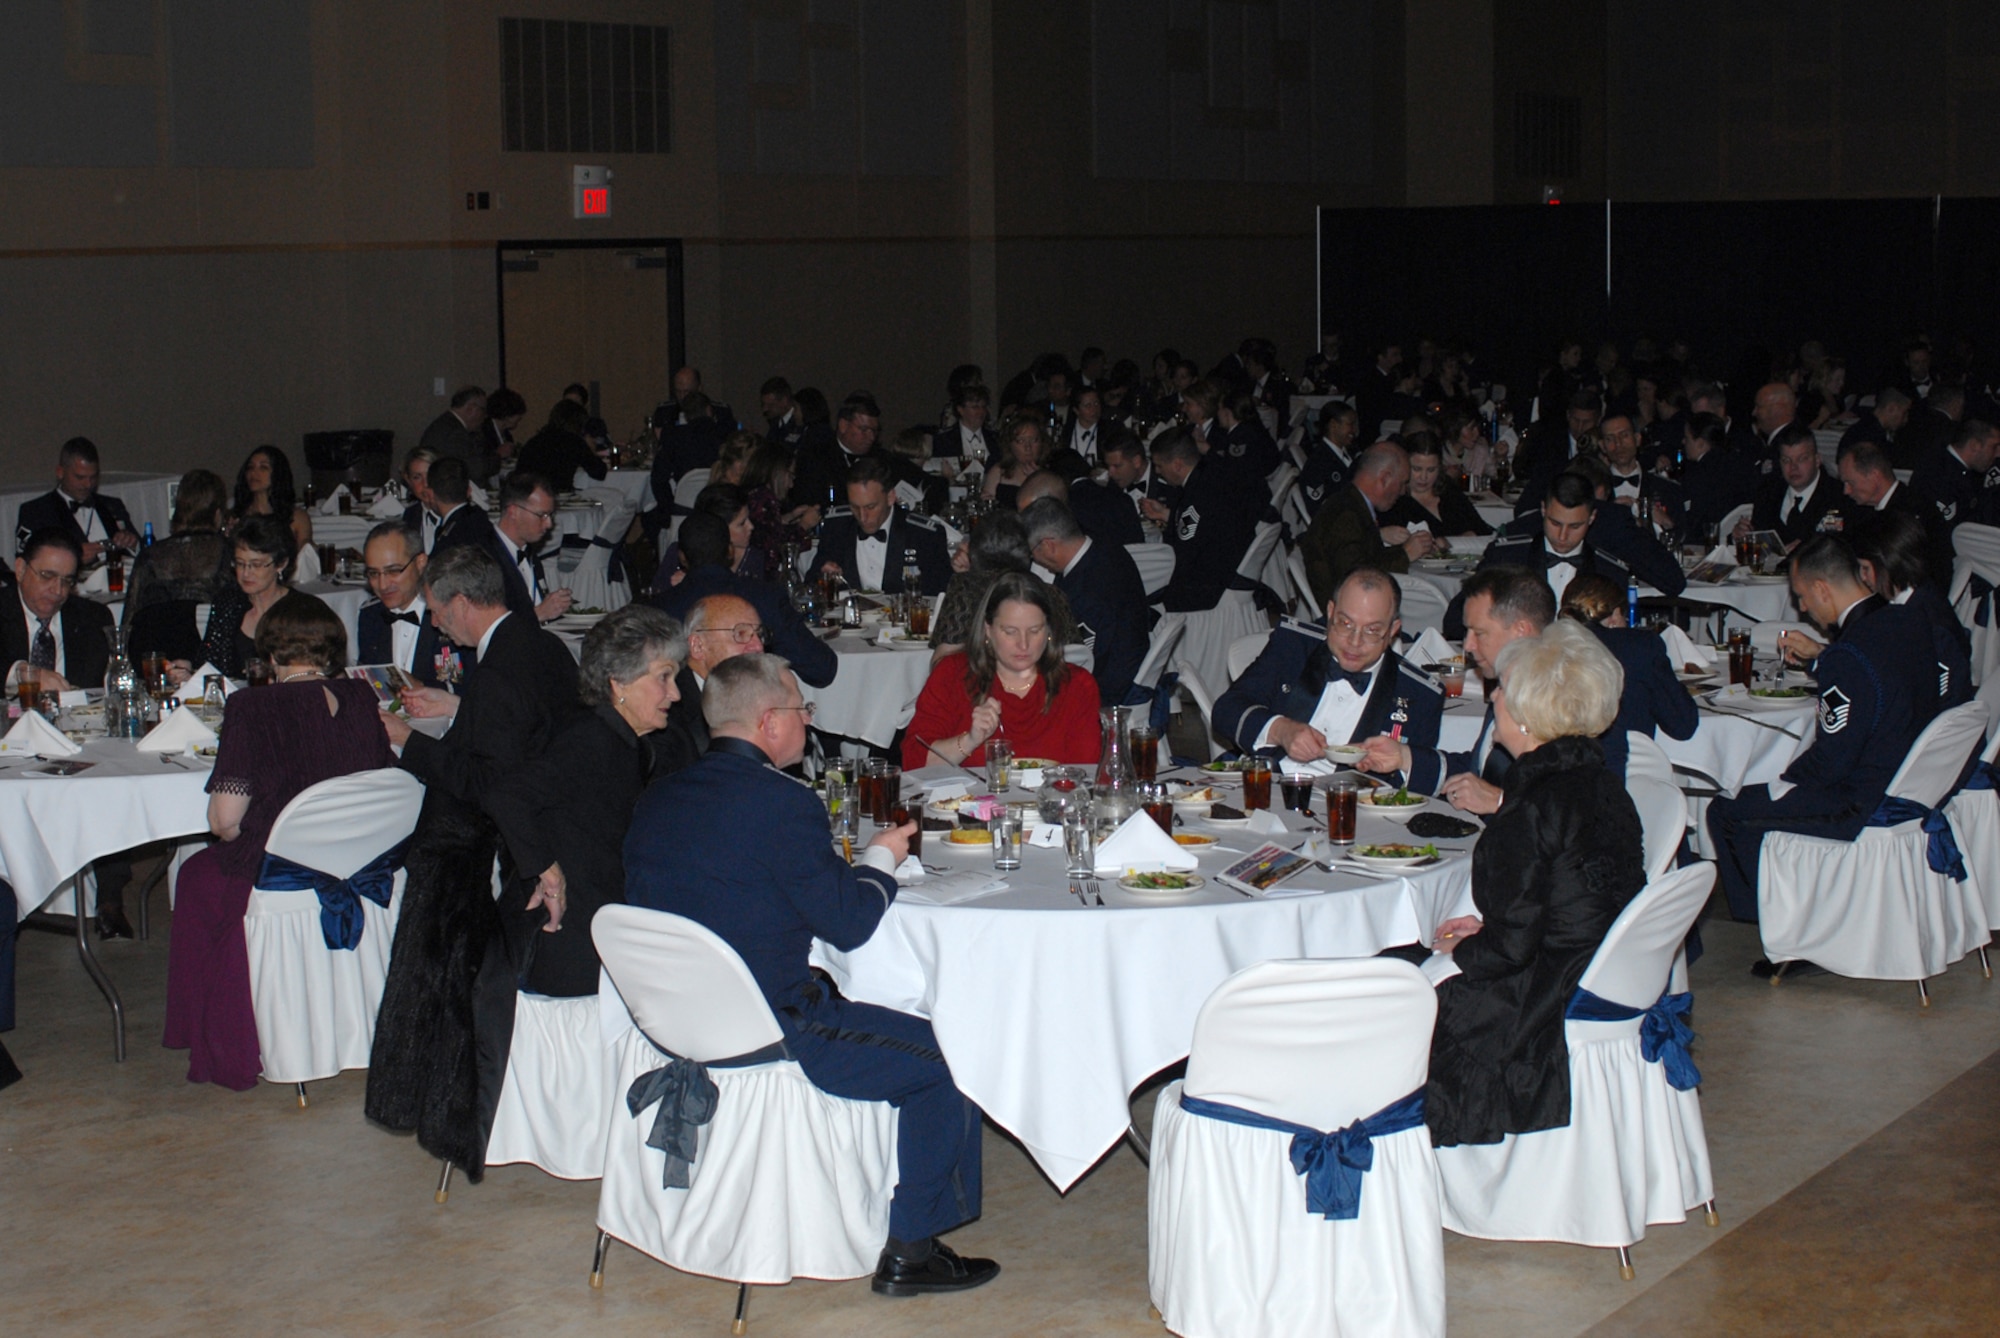 SAN ANGELO, Texas -- Attendees enjoy a meal during the GAFB 2009 Annual Awards Banquet, Feb. 2, 2010. More than 350 people attended the banquet that recognized 49 individual nominees. (U.S. Air Force photo/Staff Sgt. Laura R. McFarlane)
